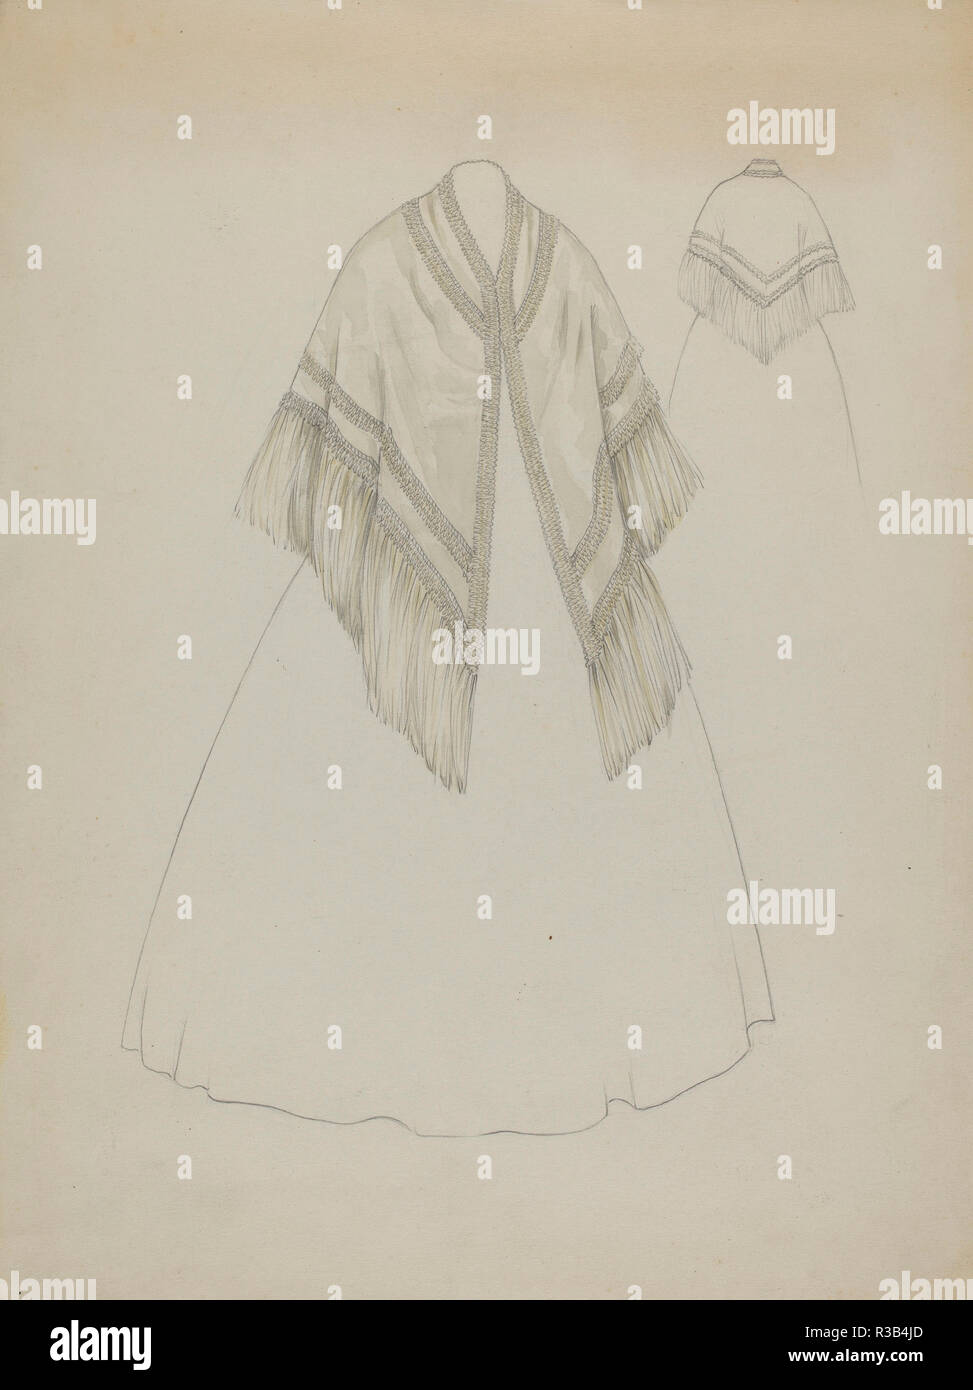 Shaker Shawl. Dated: c. 1936. Dimensions: overall: 30.6 x 22.8 cm (12 1/16 x 9 in.). Medium: watercolor and graphite on paper. Museum: National Gallery of Art, Washington DC. Author: Jessie M. Benge. Stock Photo